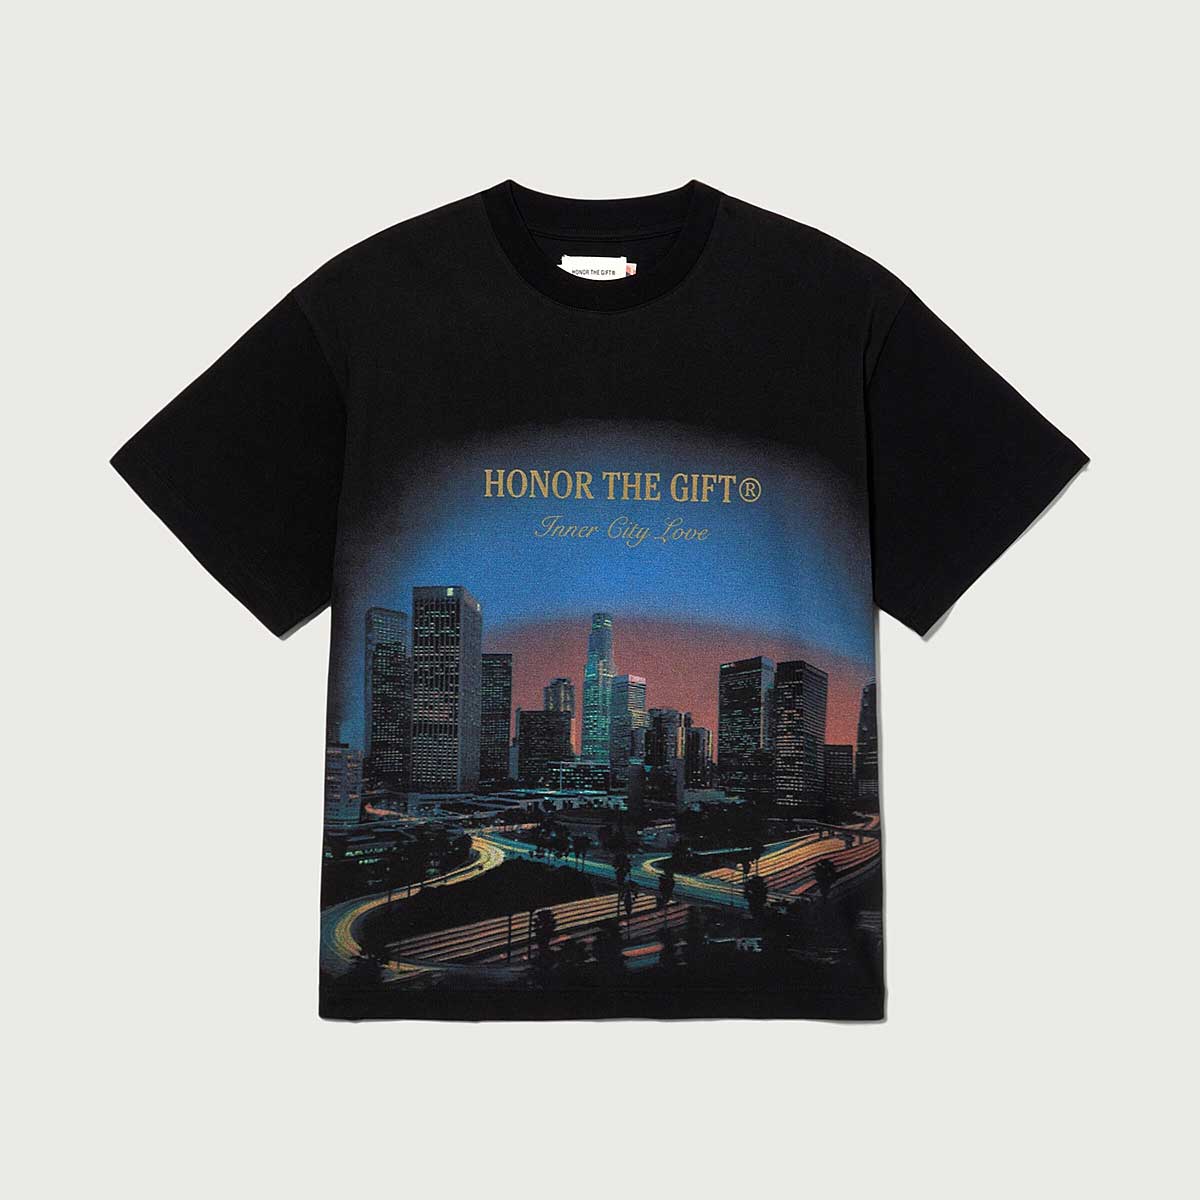 Honor The Gift Nightshift - S/S Tee, Black